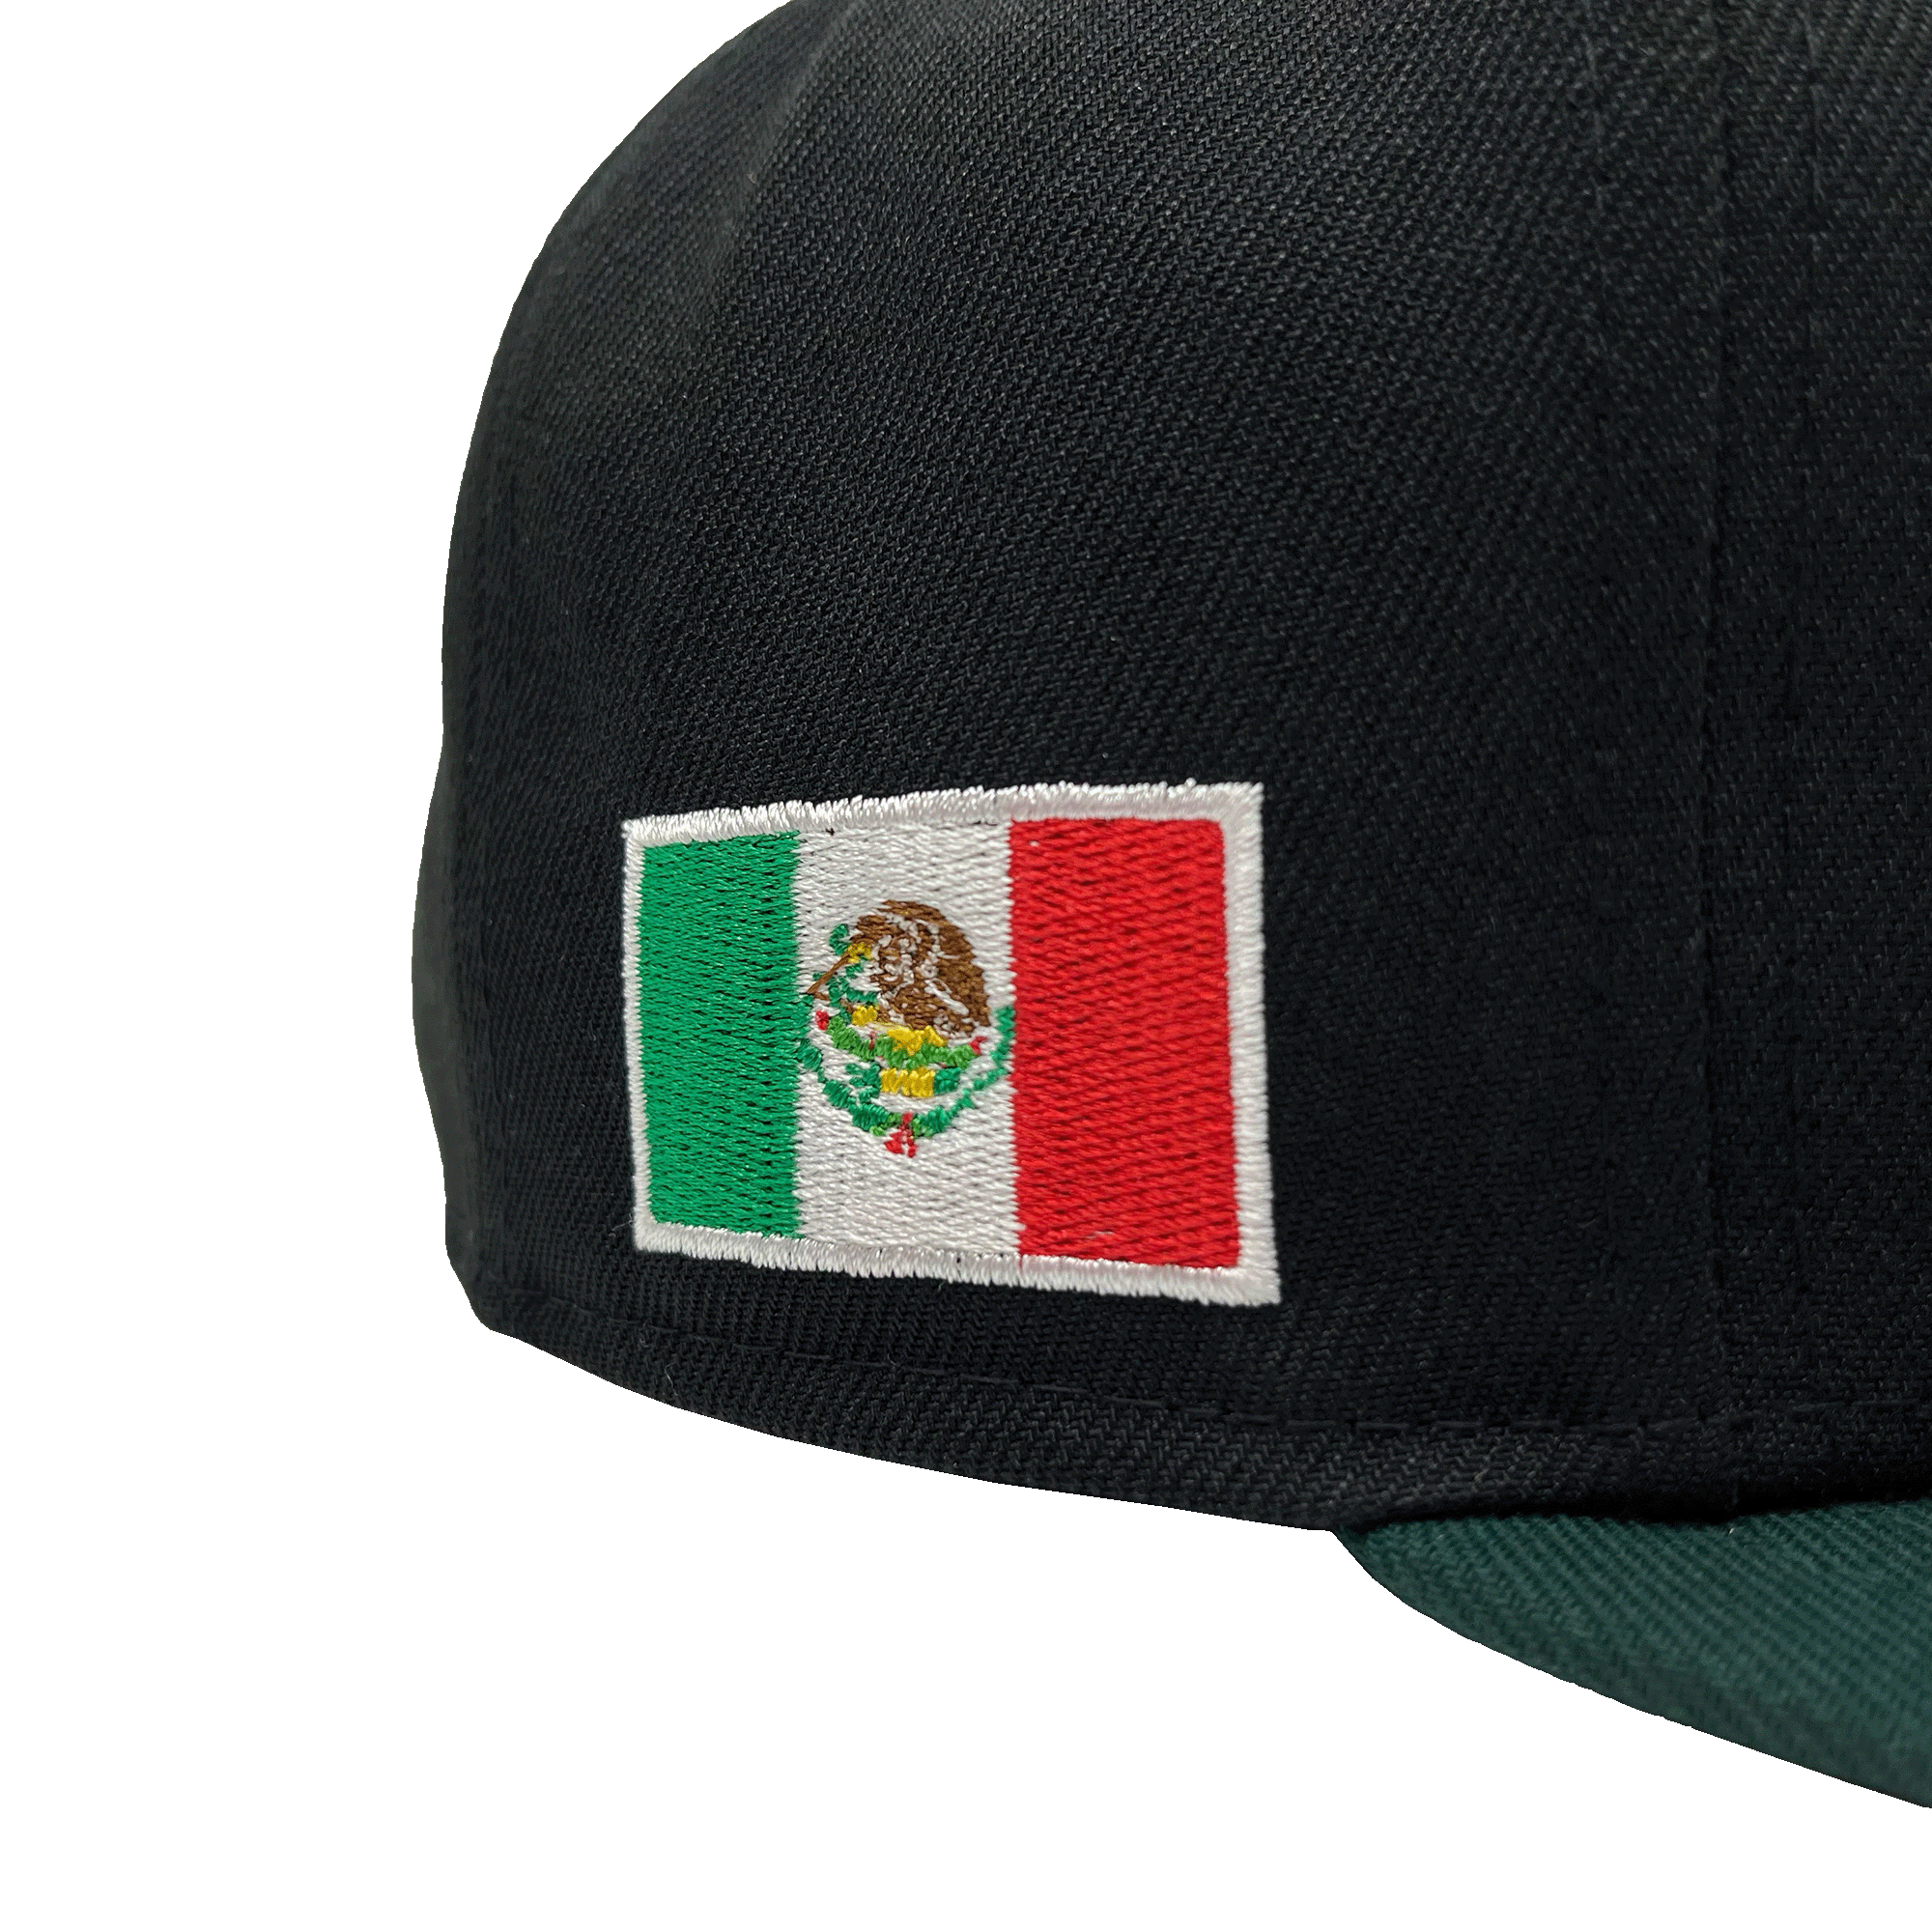 Embroidered Mexico patch.